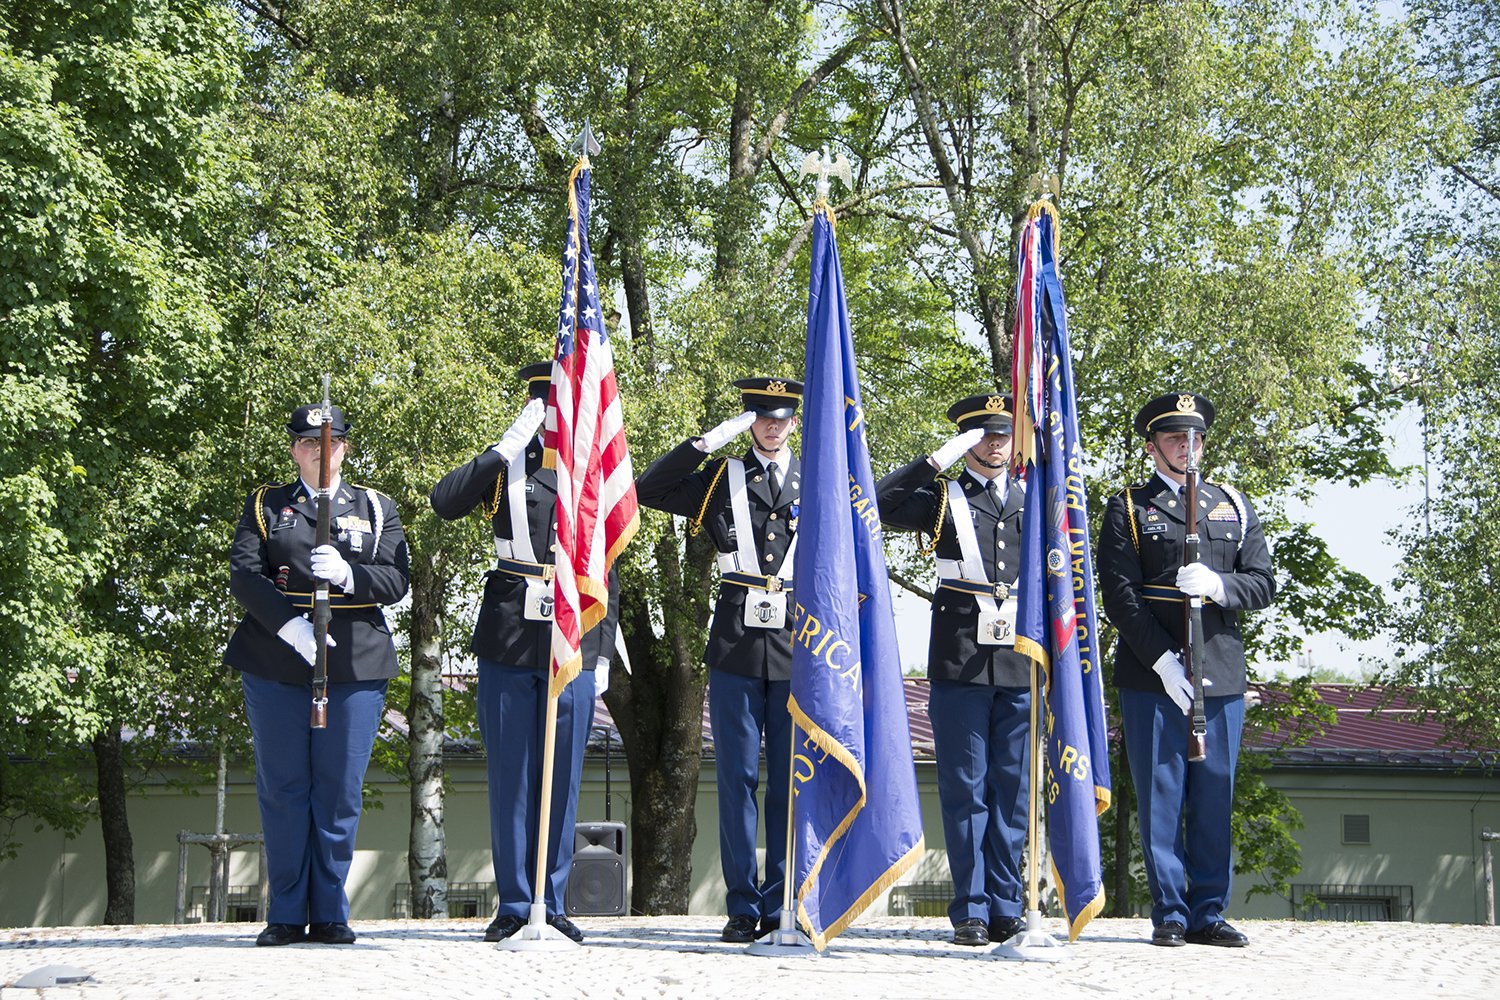 Stuttgart High School JROTC Color Guard posted colors at the U.S. Army Garrison Stuttgart Memorial Day Ceremony May 29 at Washington Square on Patch Barracks.